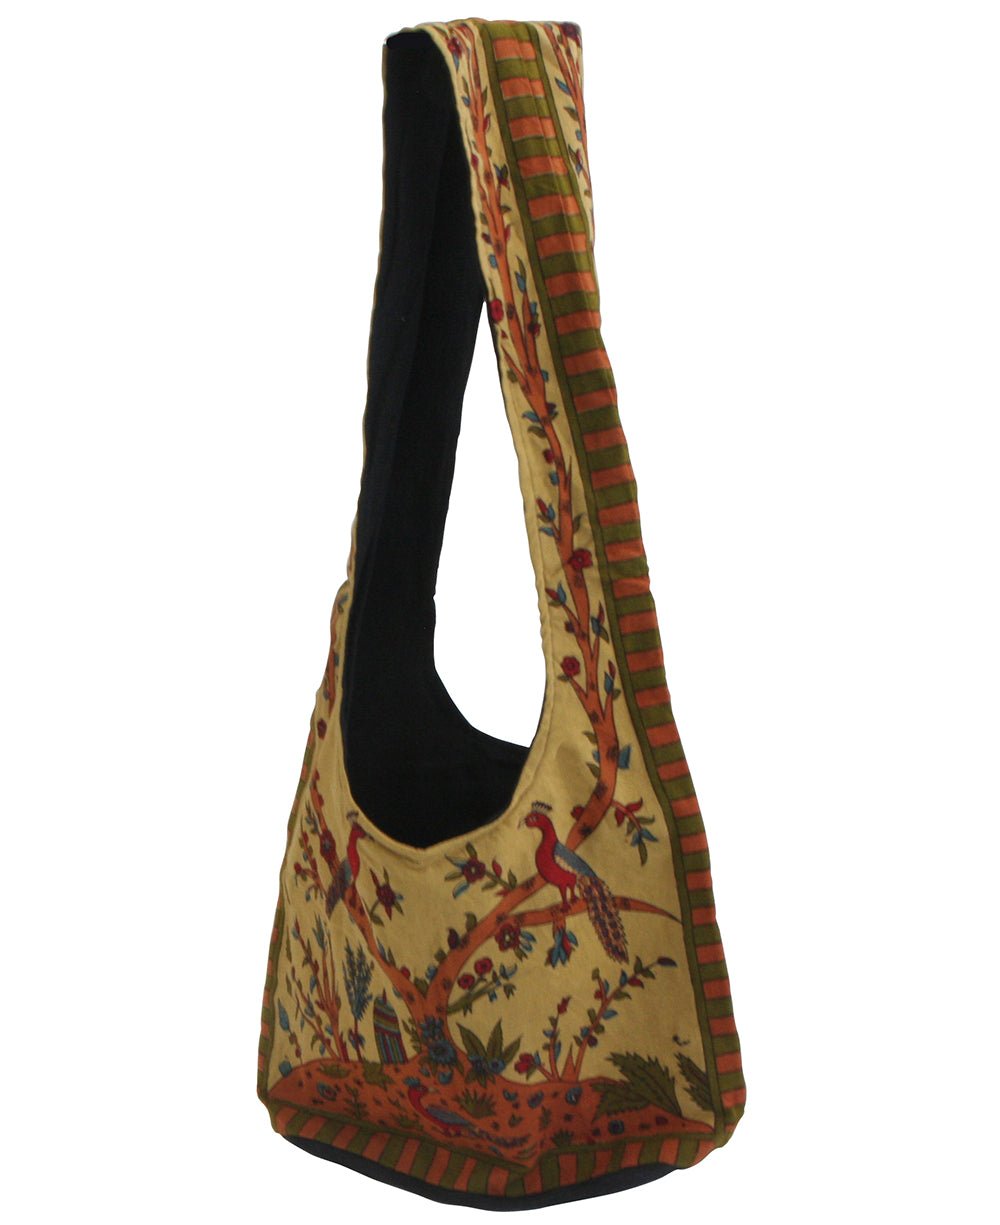 Tree of Life bag, Buy online from source